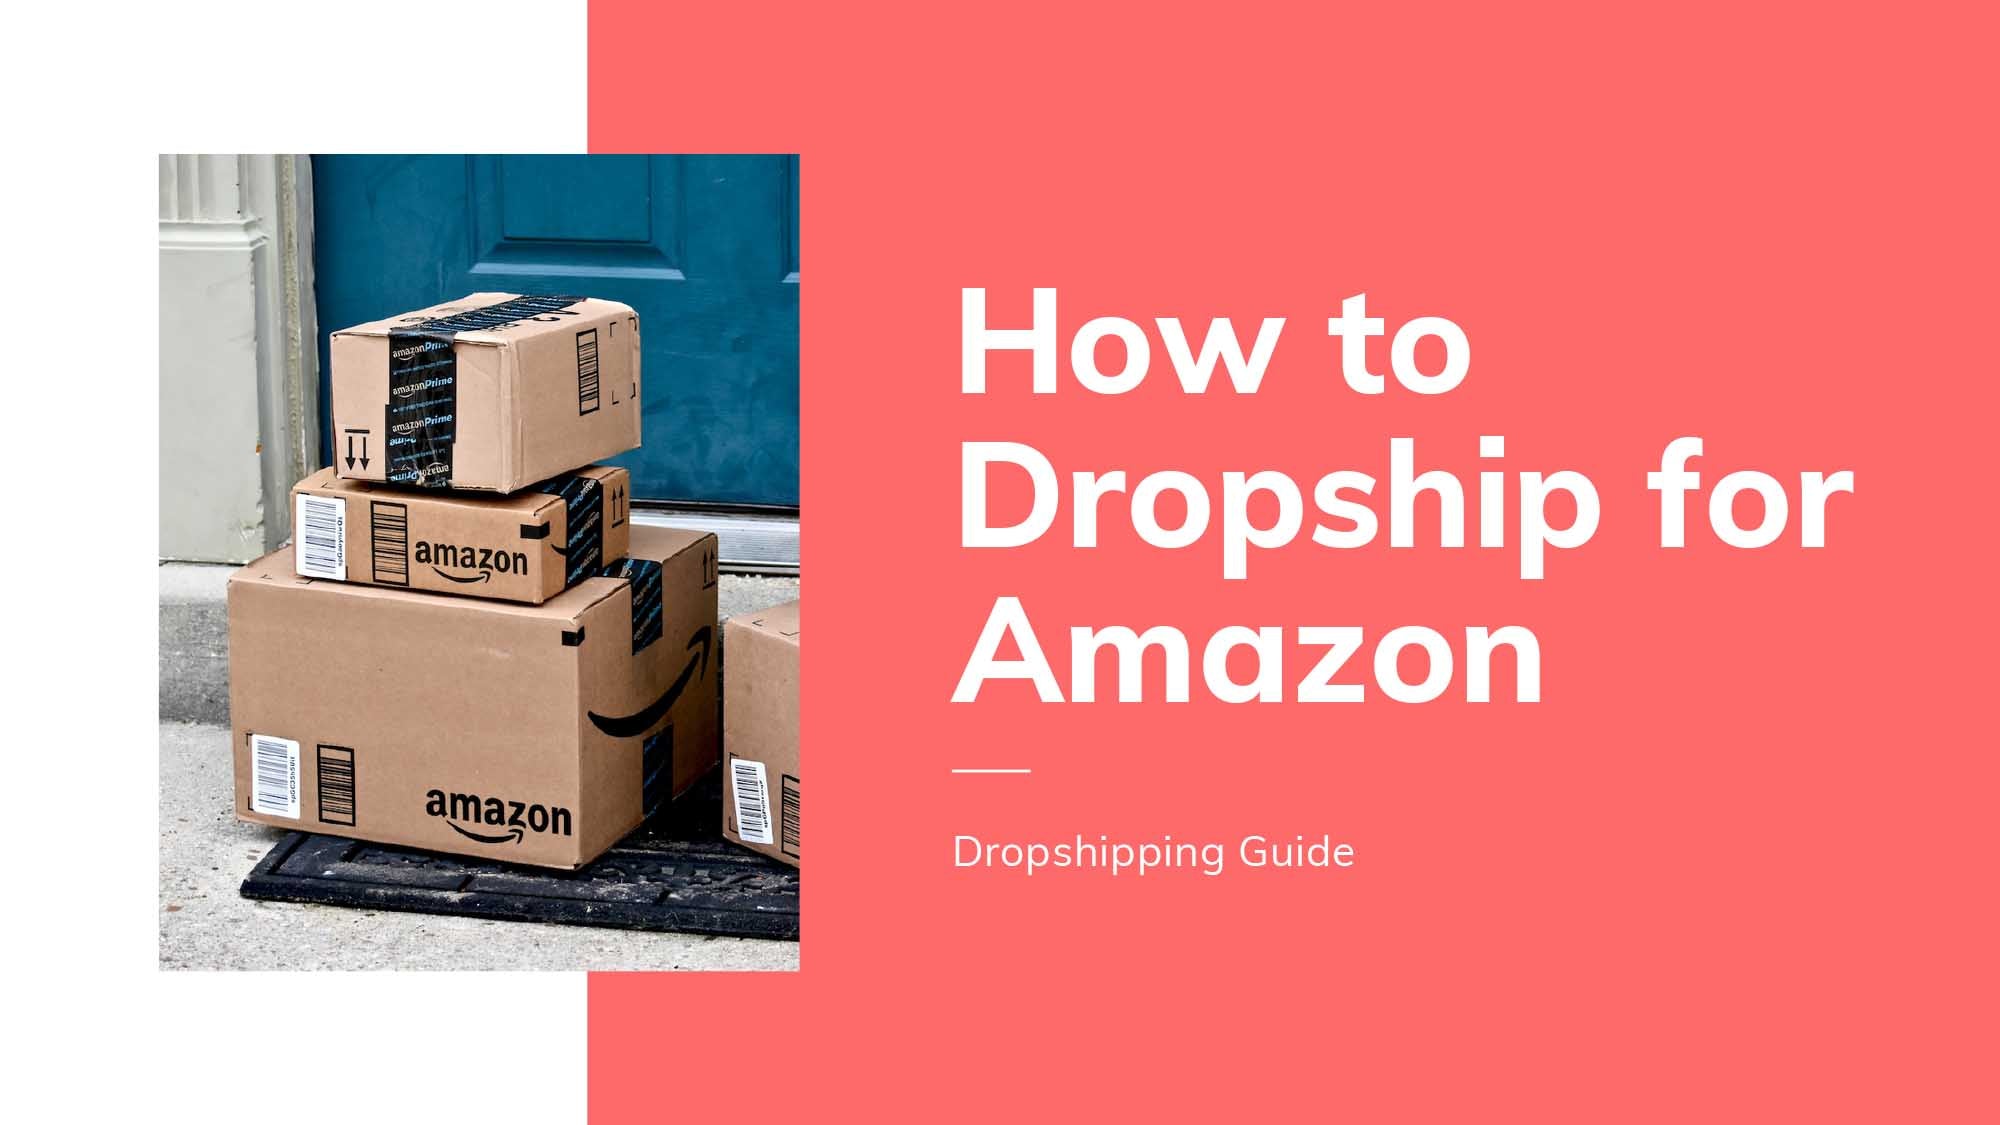 Dropshipping Guide: How To Dropship for Amazon